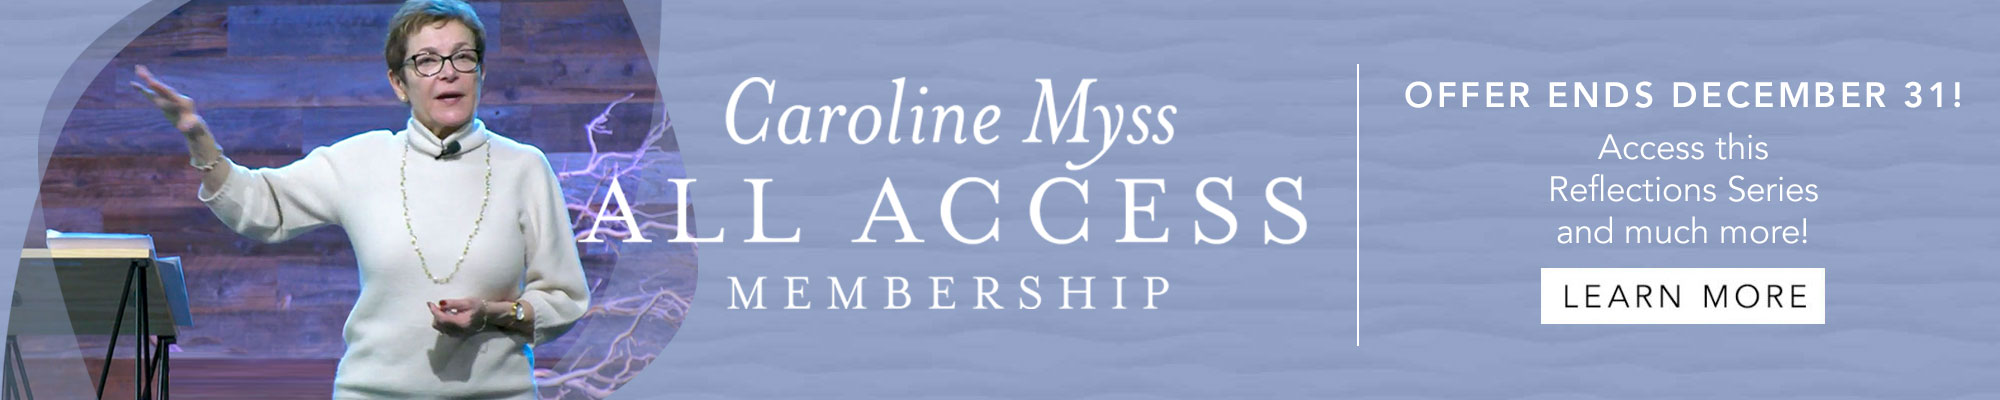 The Reflections Series is included with Caroline Myss All Access